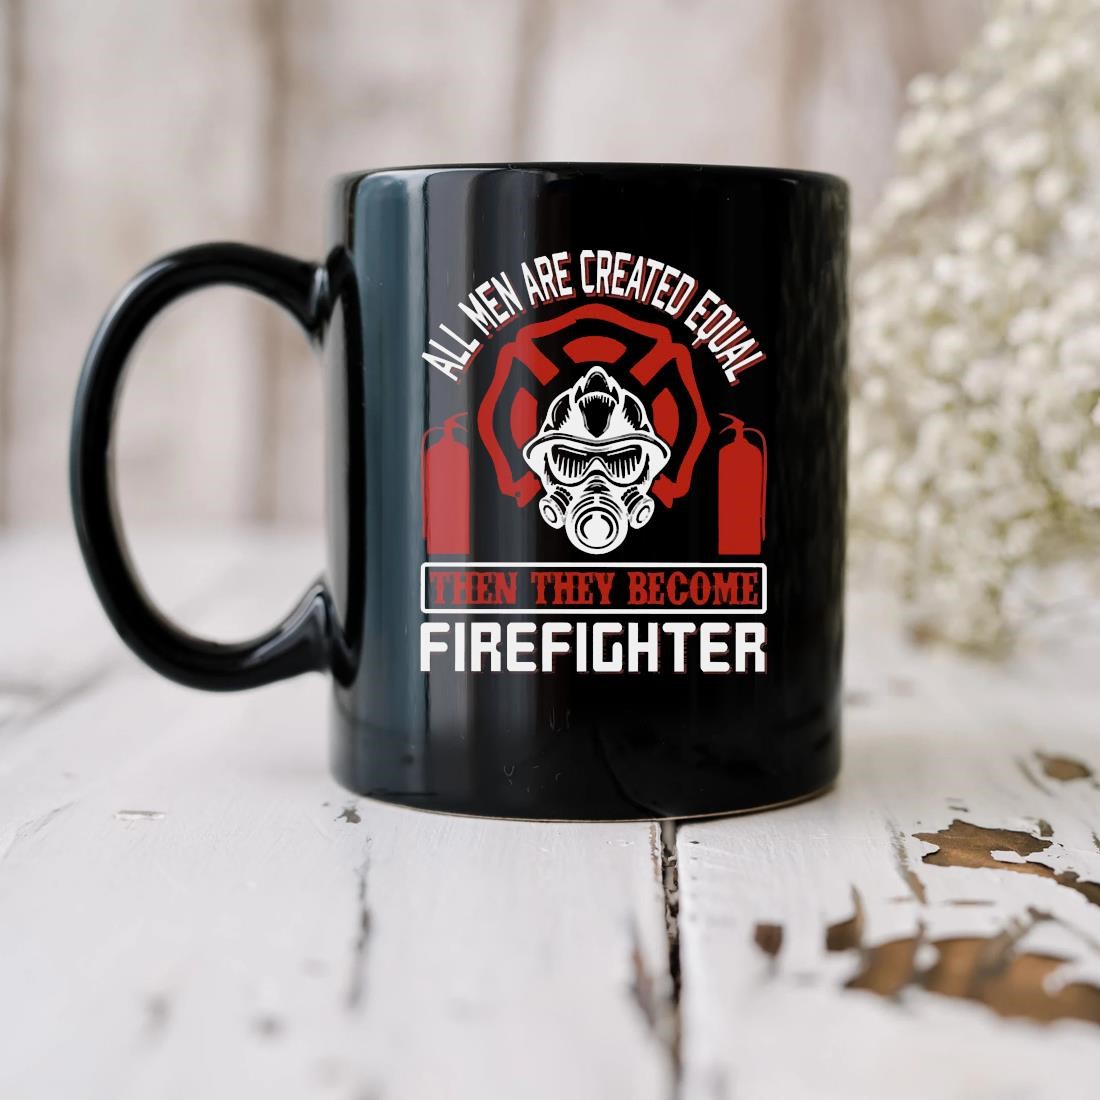 All Men Created Equal Then They Become Firefighter Mug biu.jpg